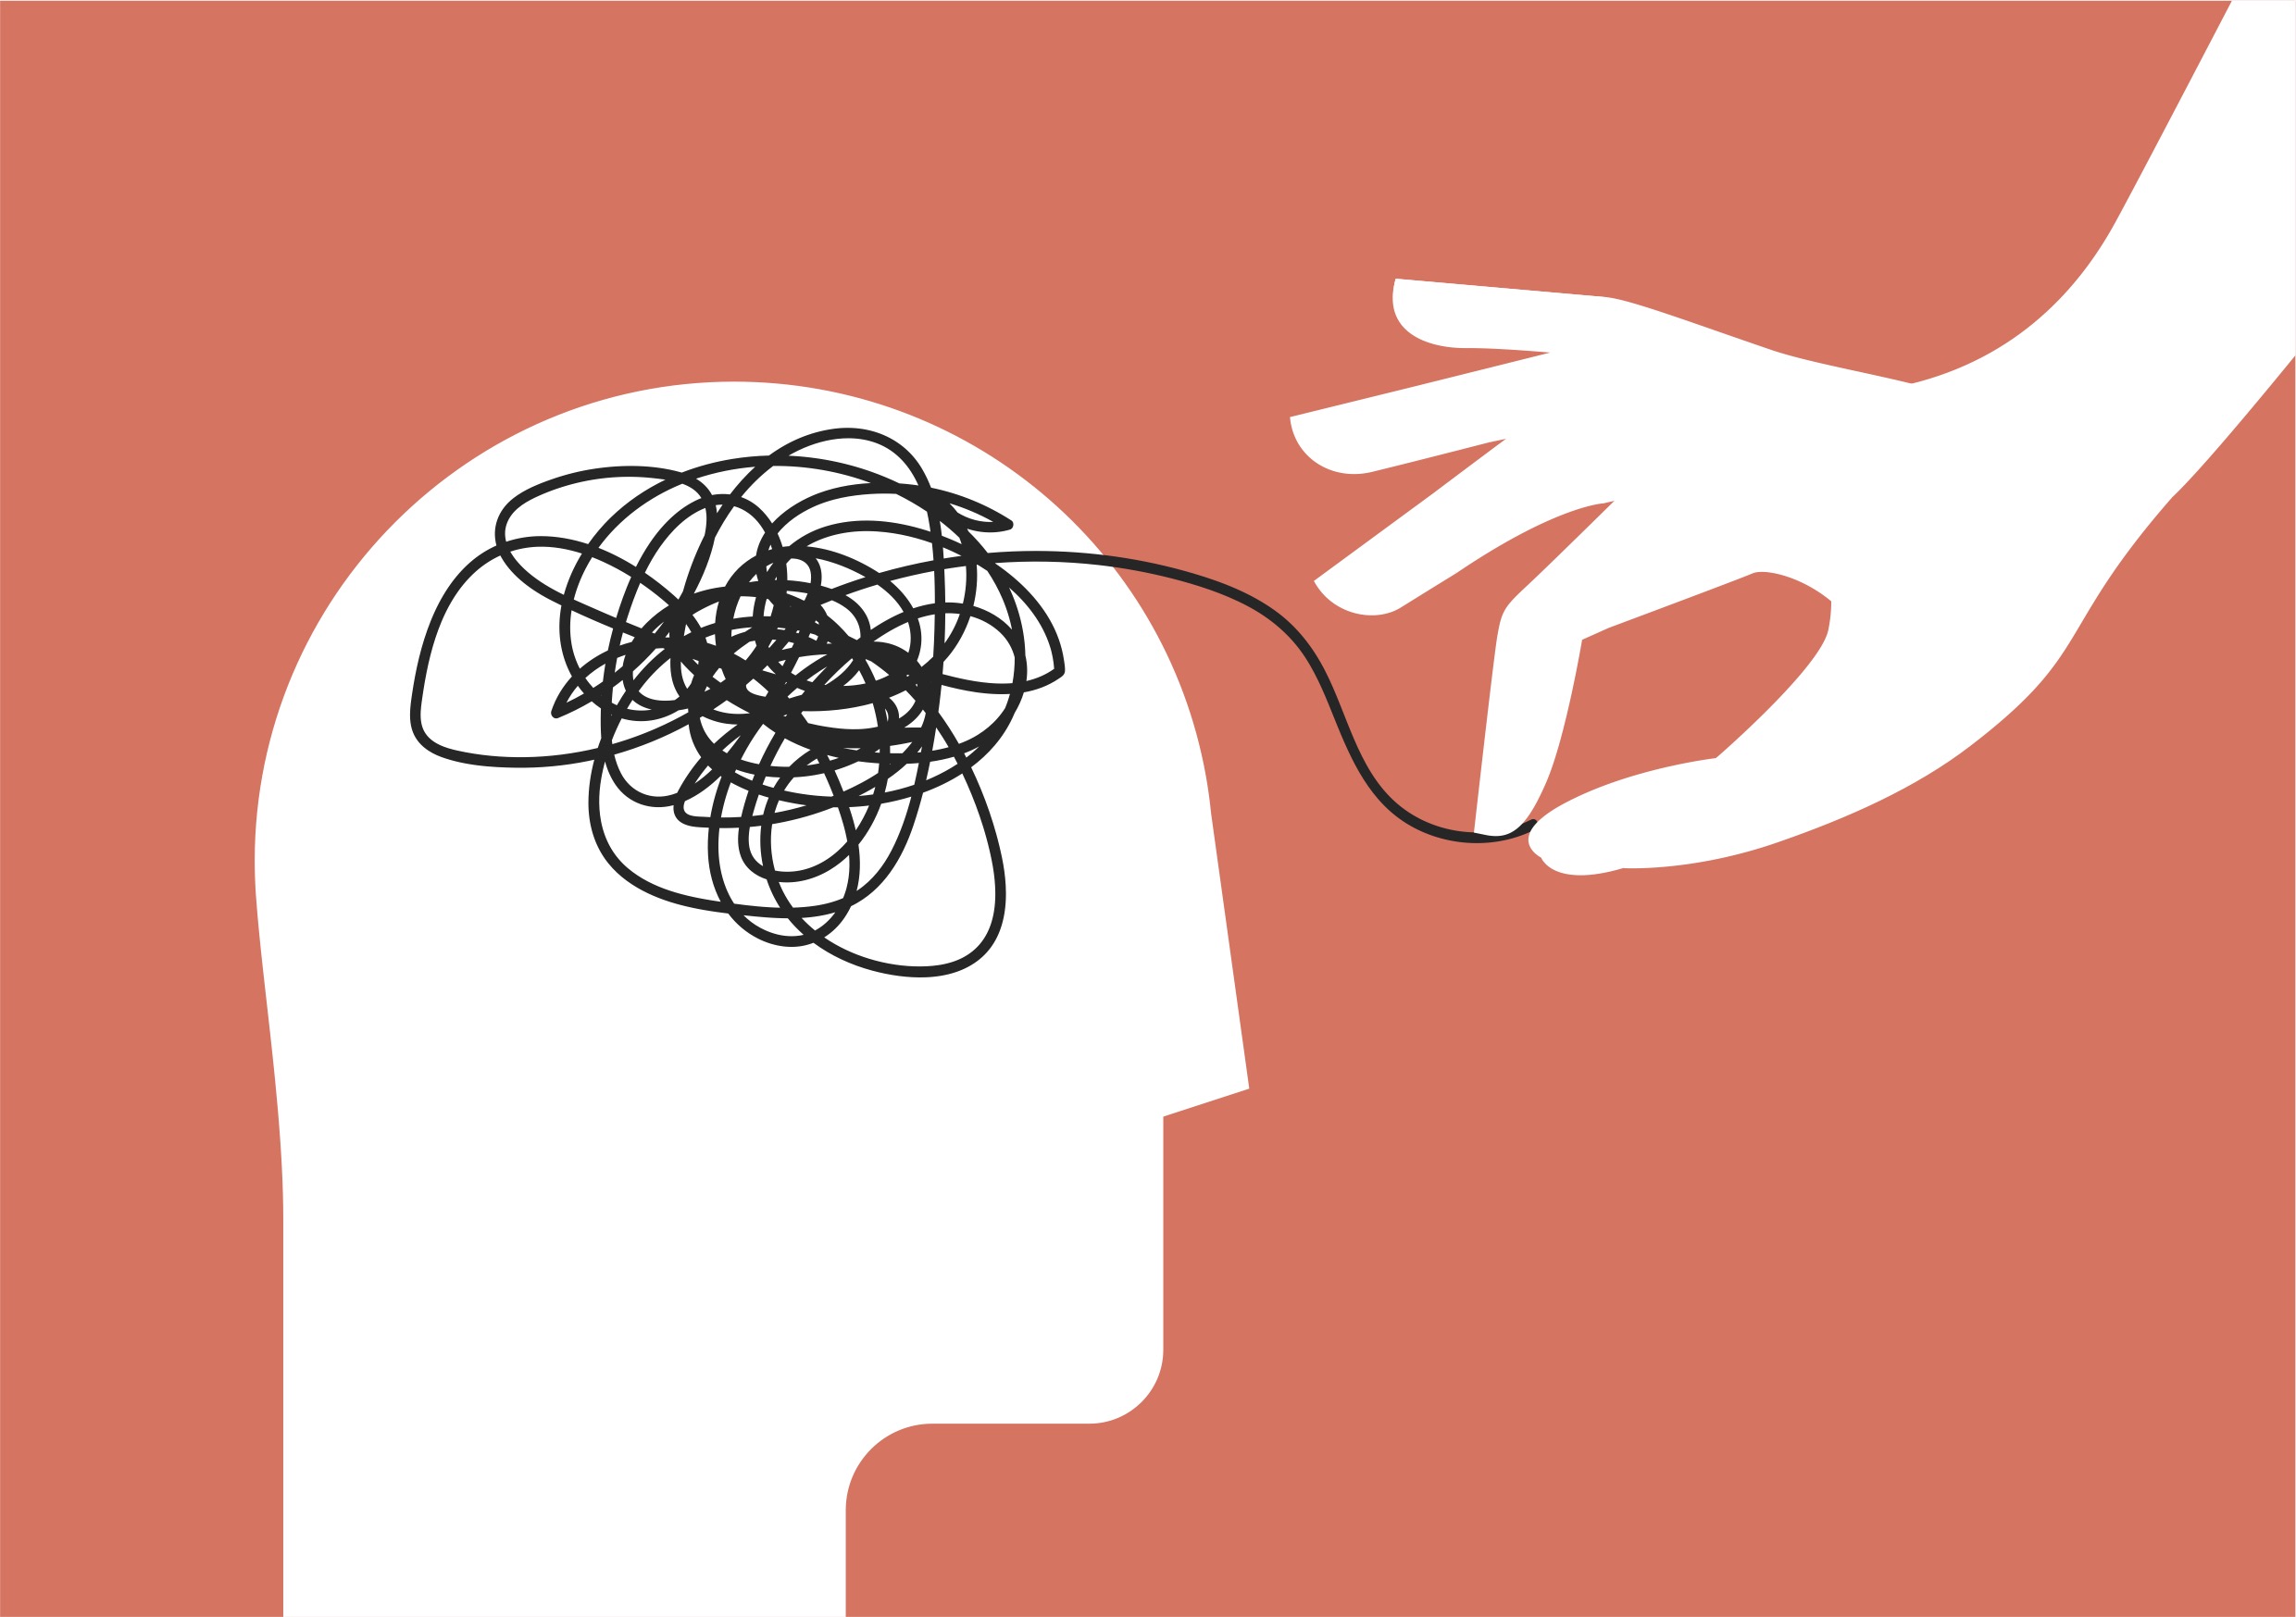 An illustration of a hand pulling a many-knotted string out of an outline of a head.